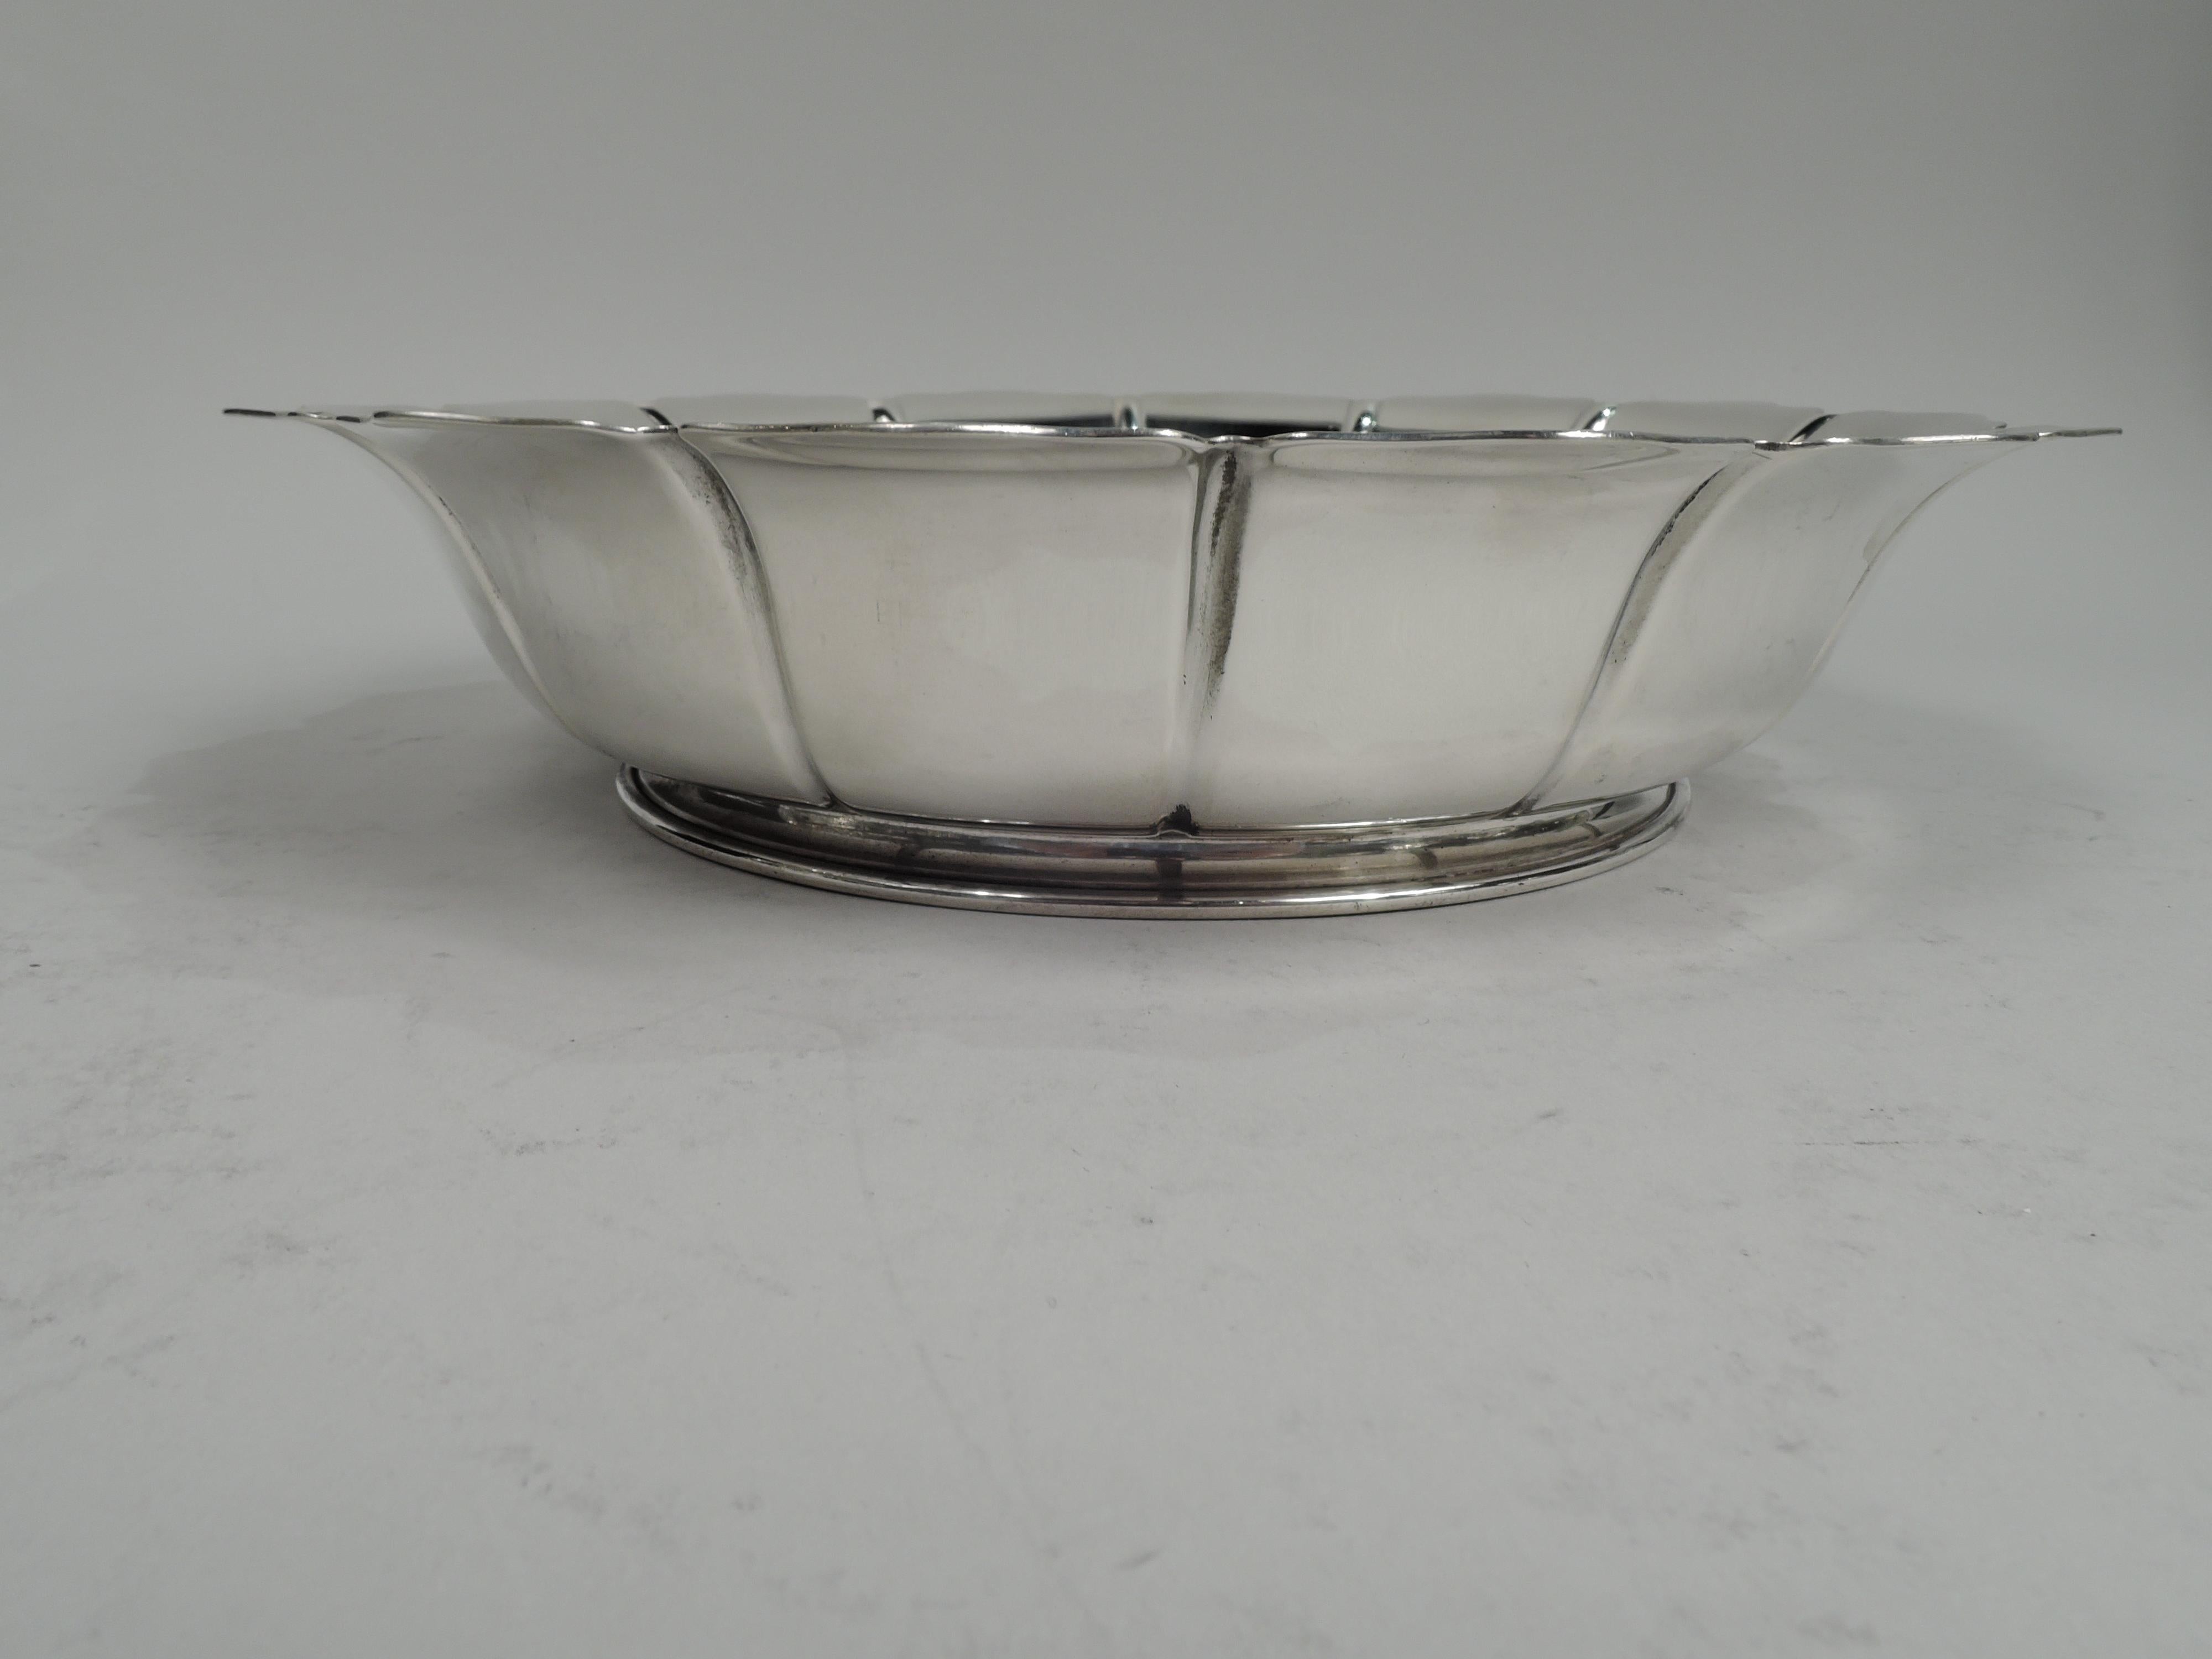 American Art Deco sterling silver bowl, ca 1930. Retailed by Cartier in New York. Round well and incised petal sides with scrolled rim. Short and spread foot. Fully marked including retailer’s stamp and no. 869. Weight: 12.5 troy ounces.